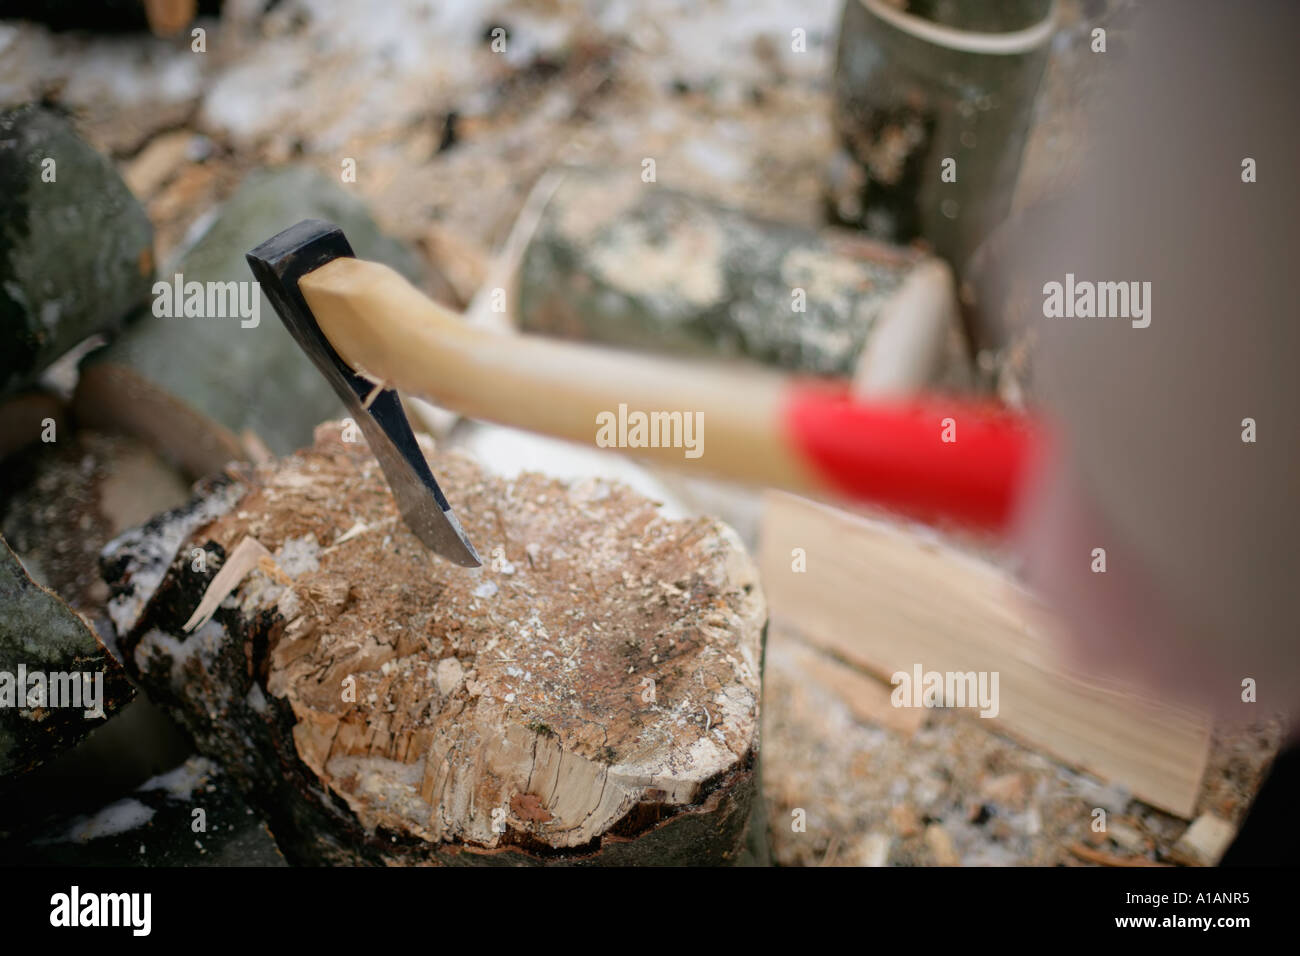 Person chopping logs Stock Photo